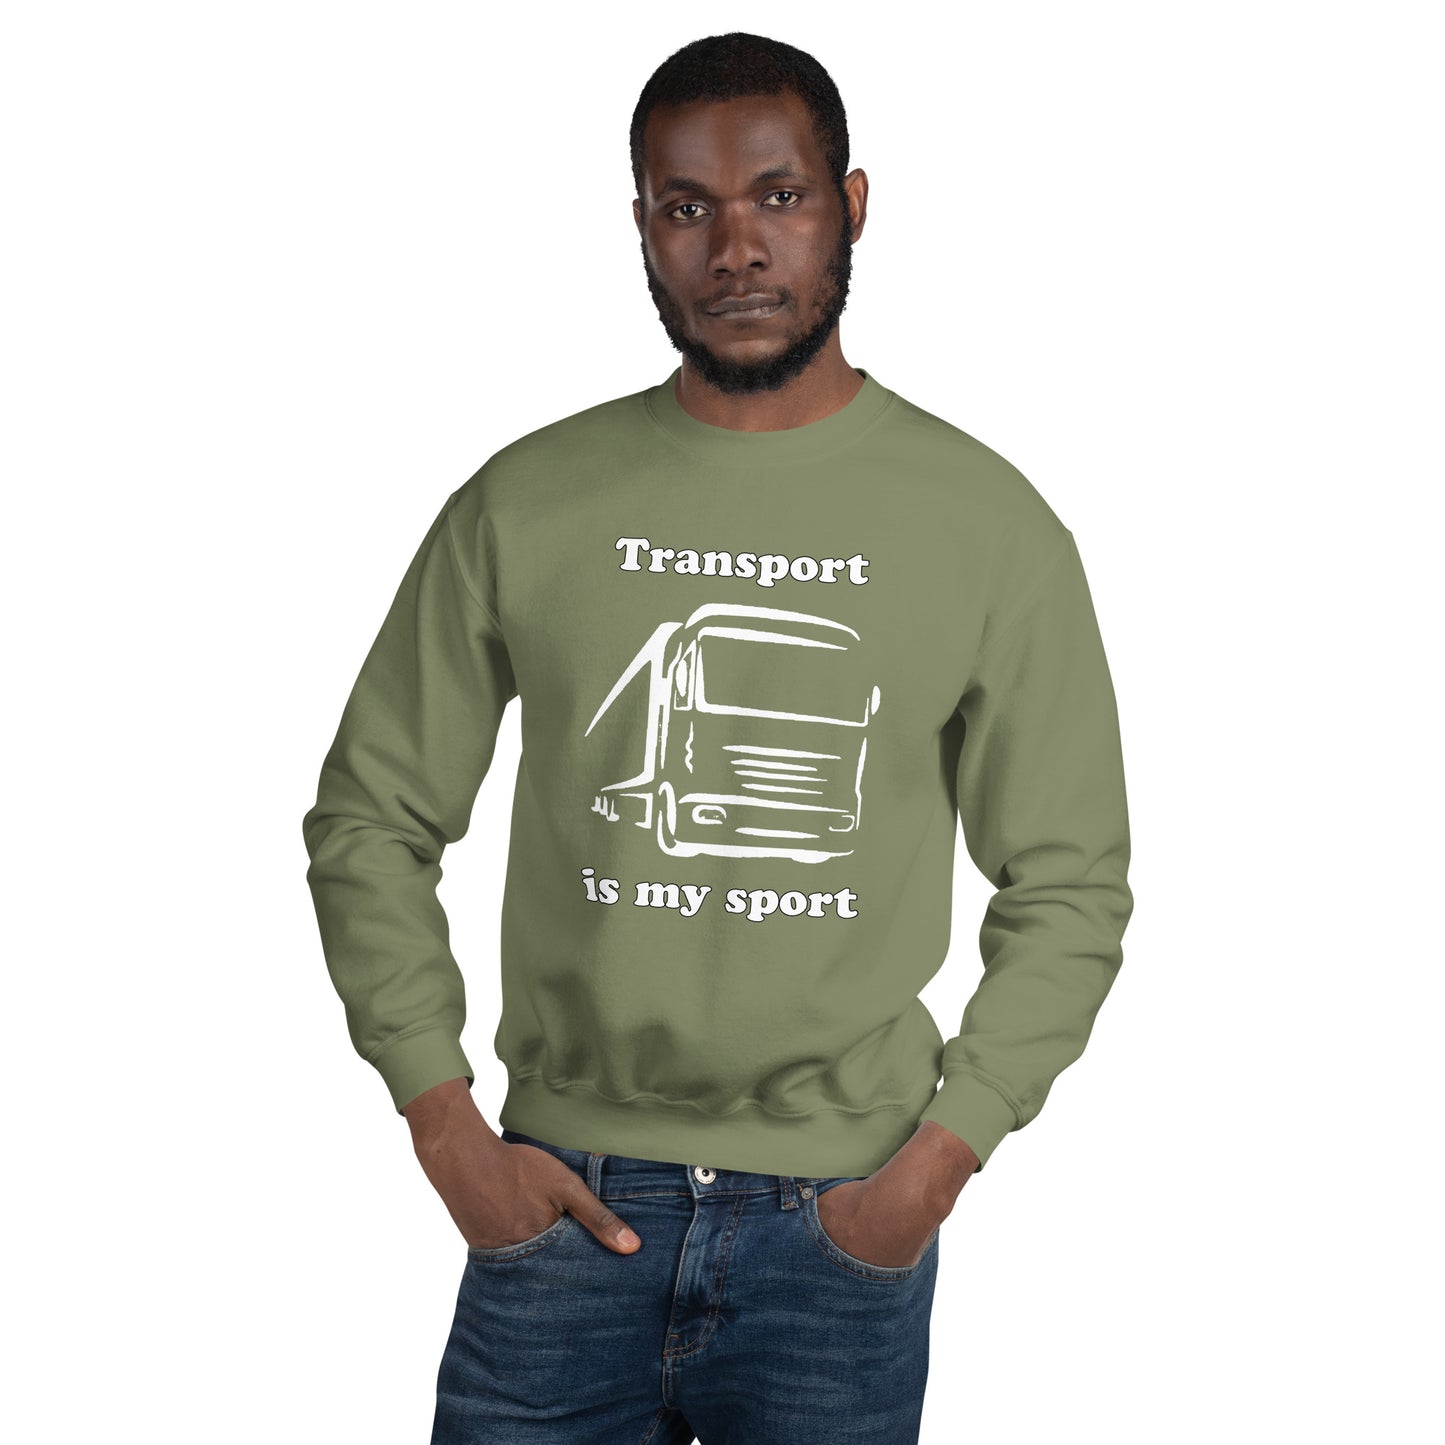 Man with military green sweatshirt with picture of truck and text "Transport is my sport"